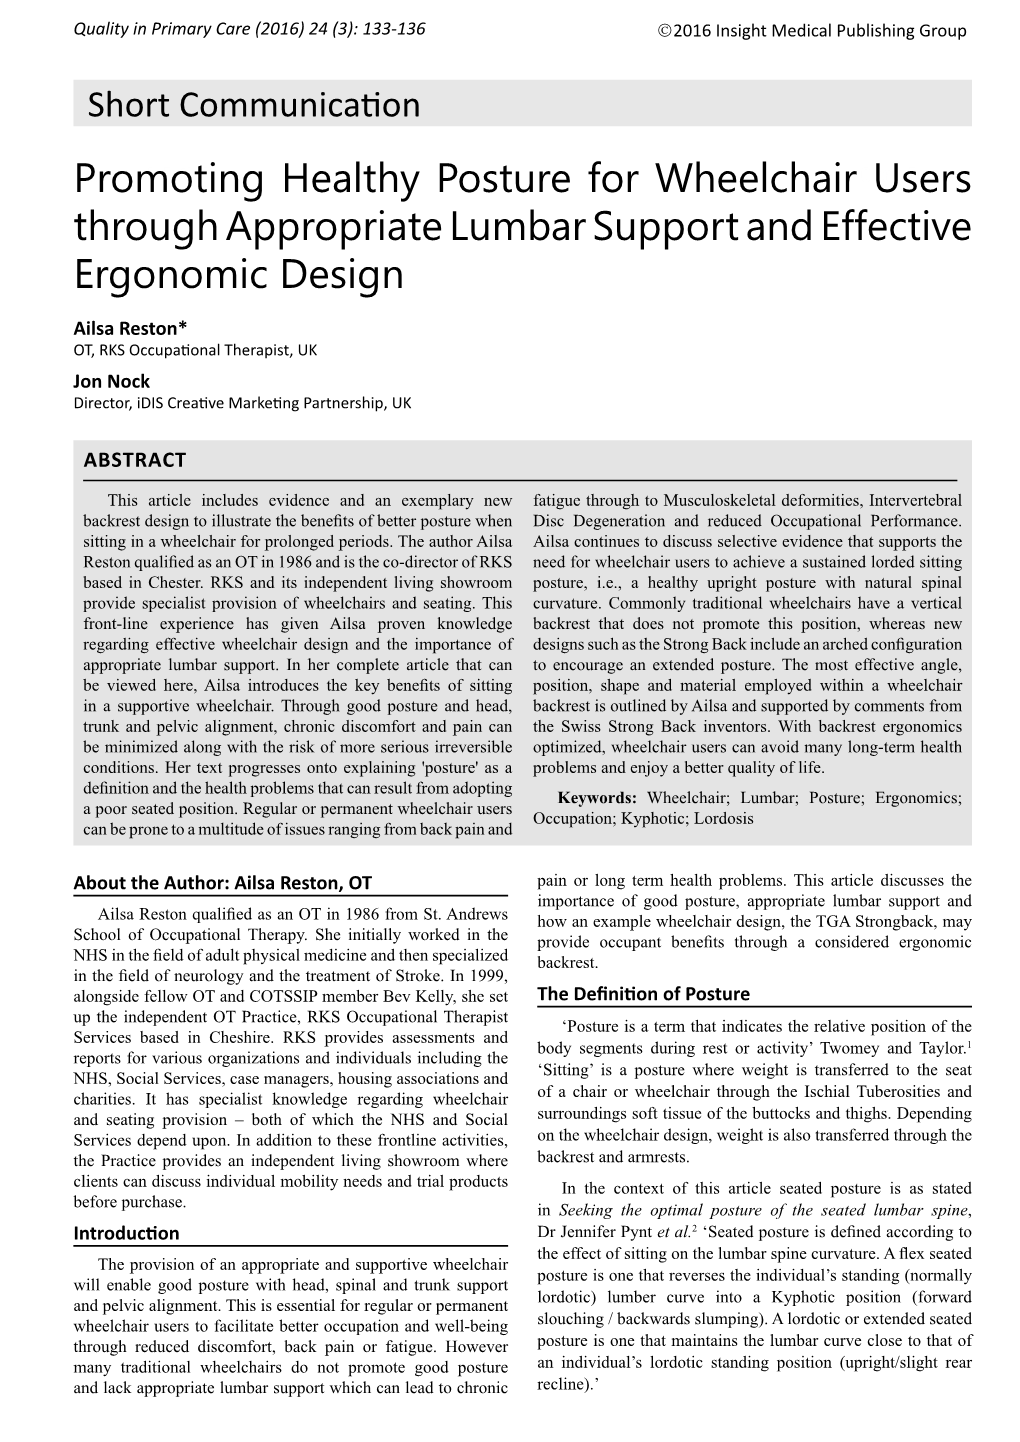 Promoting Healthy Posture for Wheelchair Users Through Appropriate Lumbar Support and Effective Ergonomic Design 135